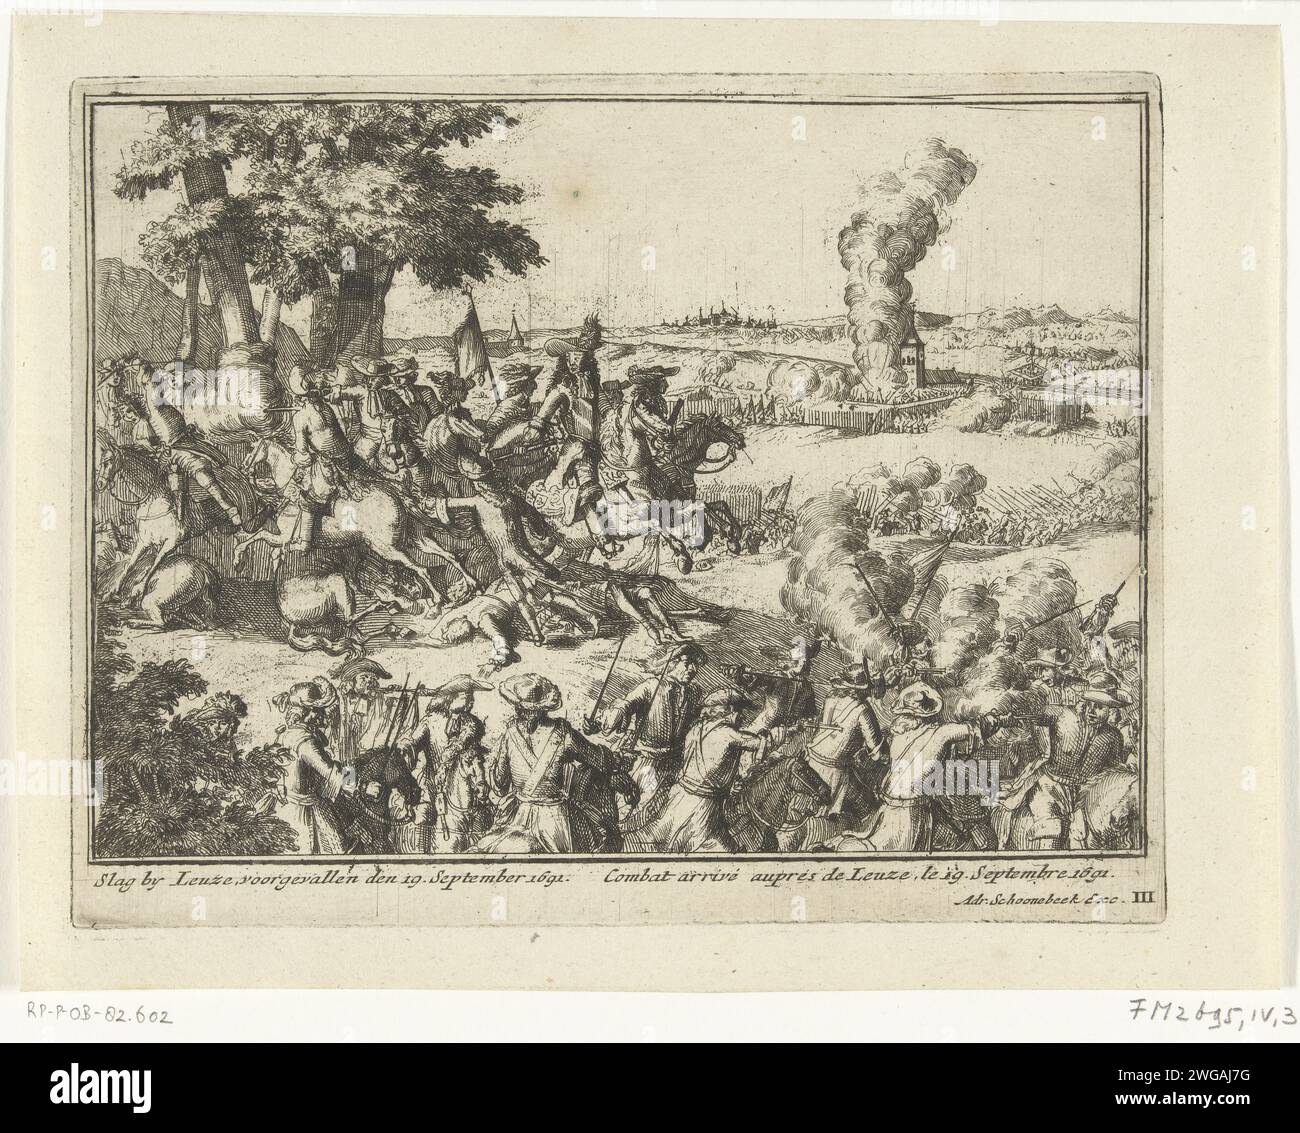 Battle of Leuze, 1691, 1695 print The army of King William III in the Battle of Leuze during the nine -year war, the city is conquered on September 19. Plate no. III in the series 'England's theater' over wars fed by William III in the years 1691-1695 after the Glorious Revolution, (fourth part). With captions in Dutch and French. print maker: Northern Netherlandsprint maker: Amsterdampublisher: Amsterdam paper etching battle (+ land forces) Slogan Stock Photo